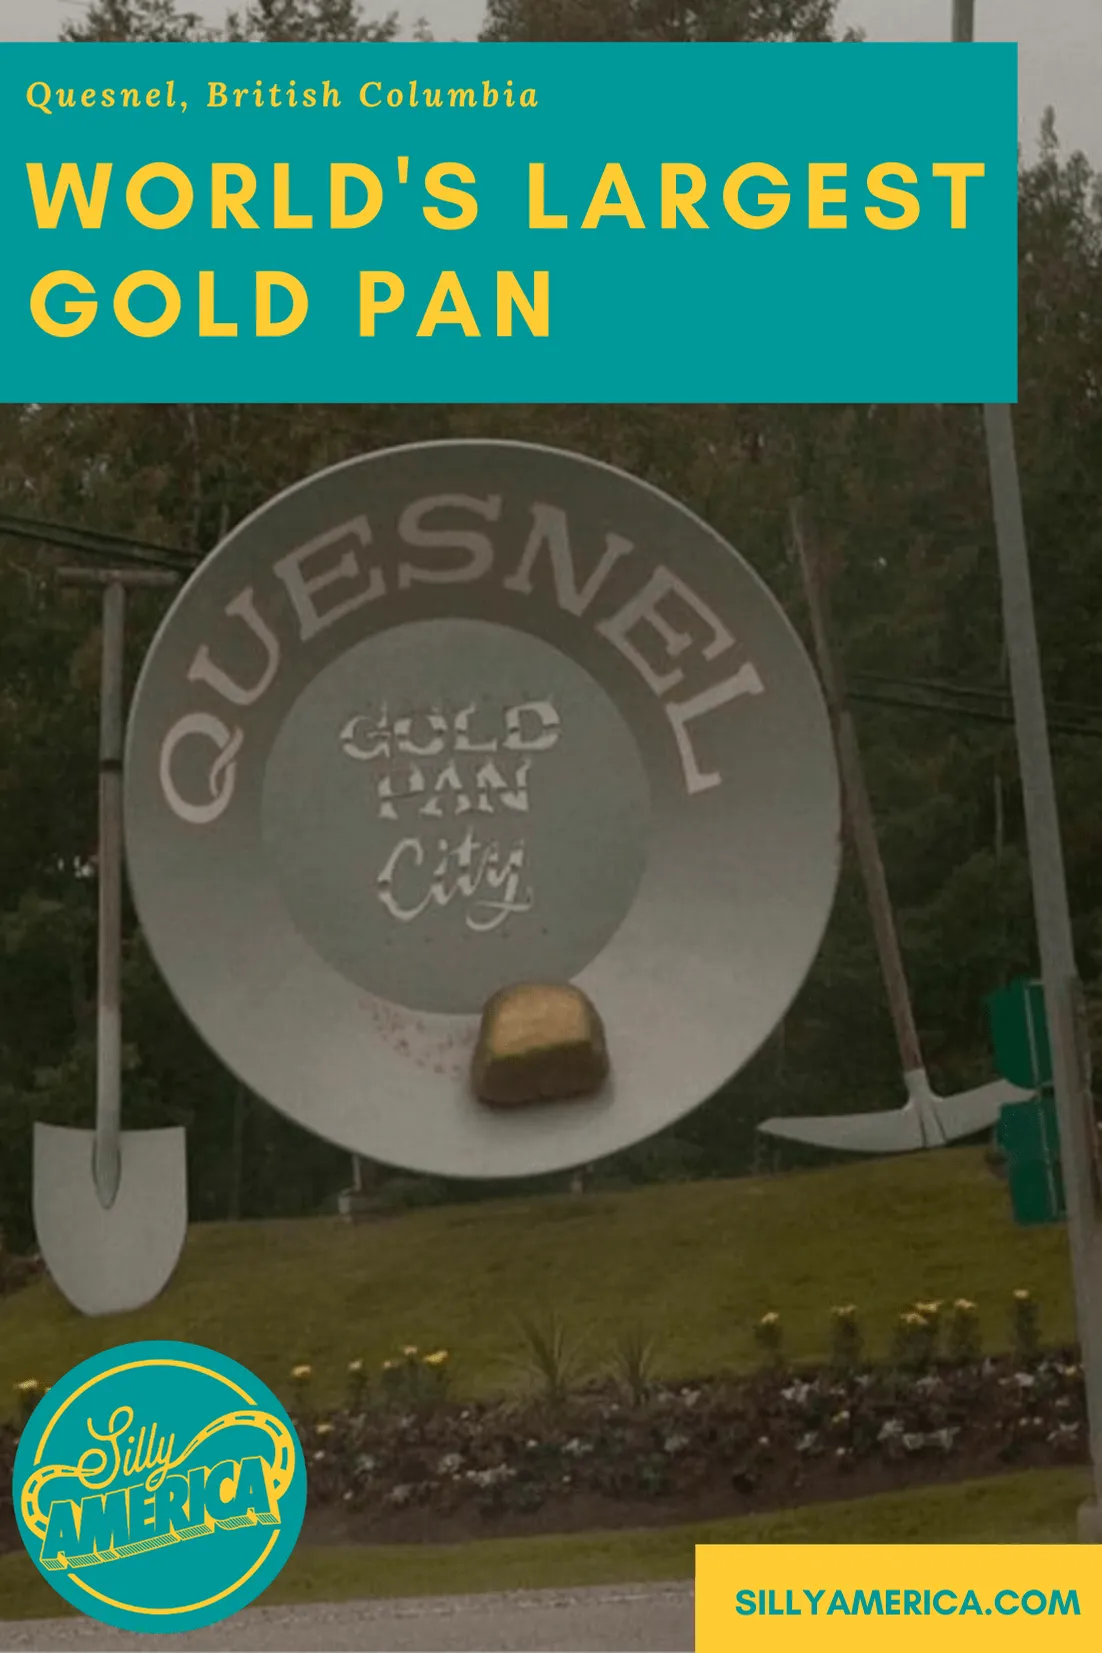 Since 1987 Quesnel, British Columbia has been home to this Canadian roadside attraction: the world's largest gold pan in "Gold Pan City." Visit this stop on the Gold Rush Trail on your next Canadian road trip. #CanadianRoadsideAttractions #CanadianRoadsideAttraction #RoadsideAttractions #RoadsideAttraction #RoadTrip #CanadaRoadTrip #CanadaRoadTripIdeas #CanadaRoadTripItinerary #CrossCanadaRoadTrip #CanadaRoadTripBucketLists #CanadaBucketList #CanadaRoadTripWithKids #BritishColumbia